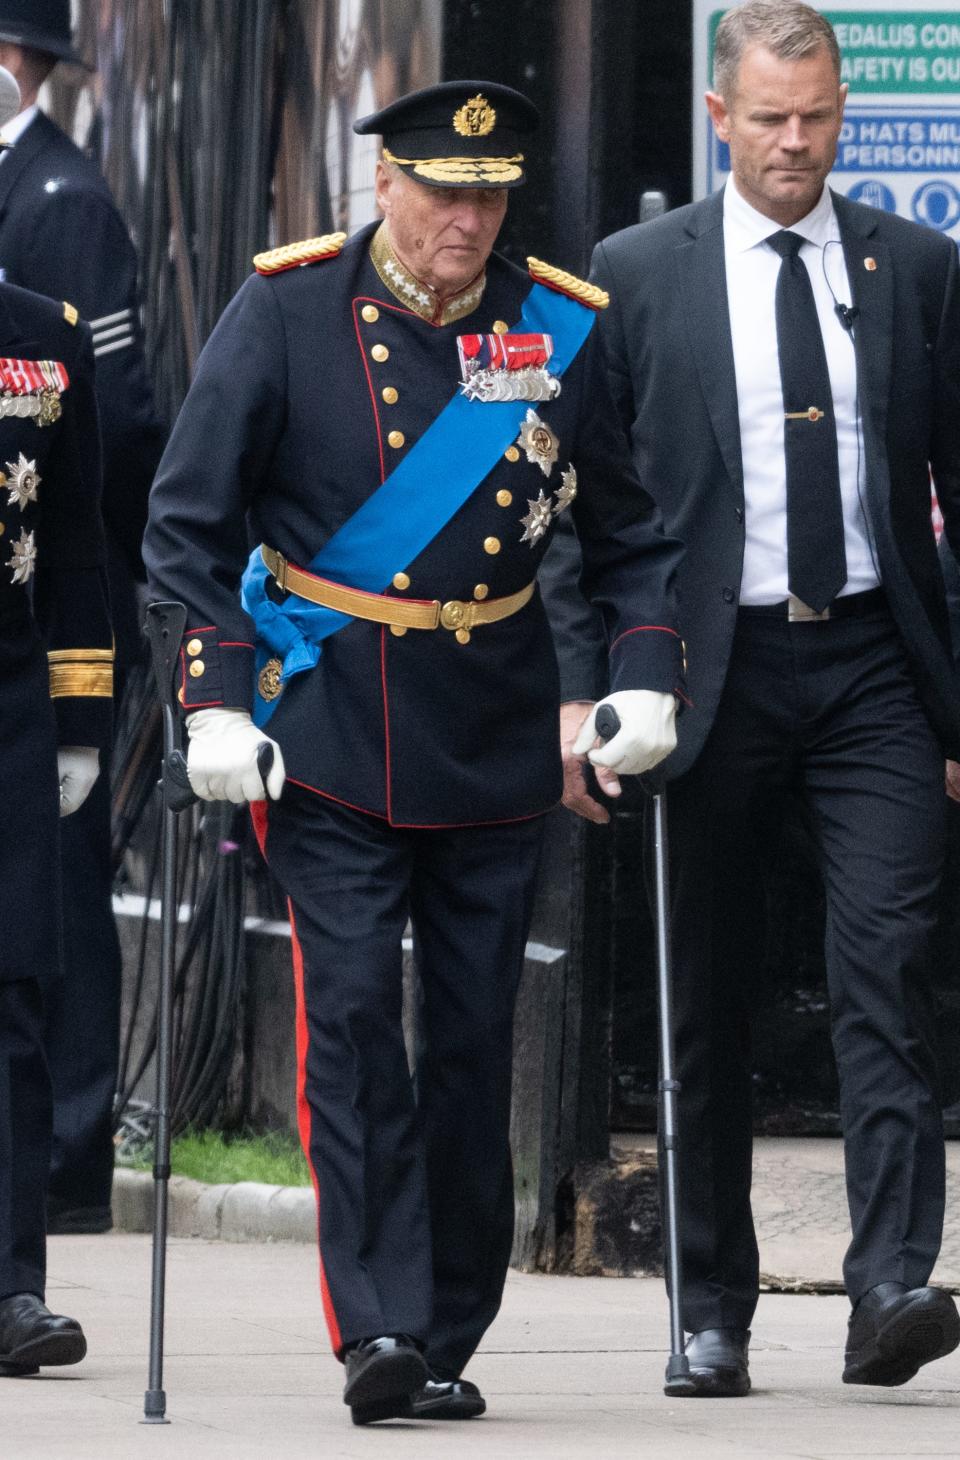 Harald V of Norway during the State Funeral of Queen Elizabeth II at Westminster Abbey on September 19, 2022 in London, England.